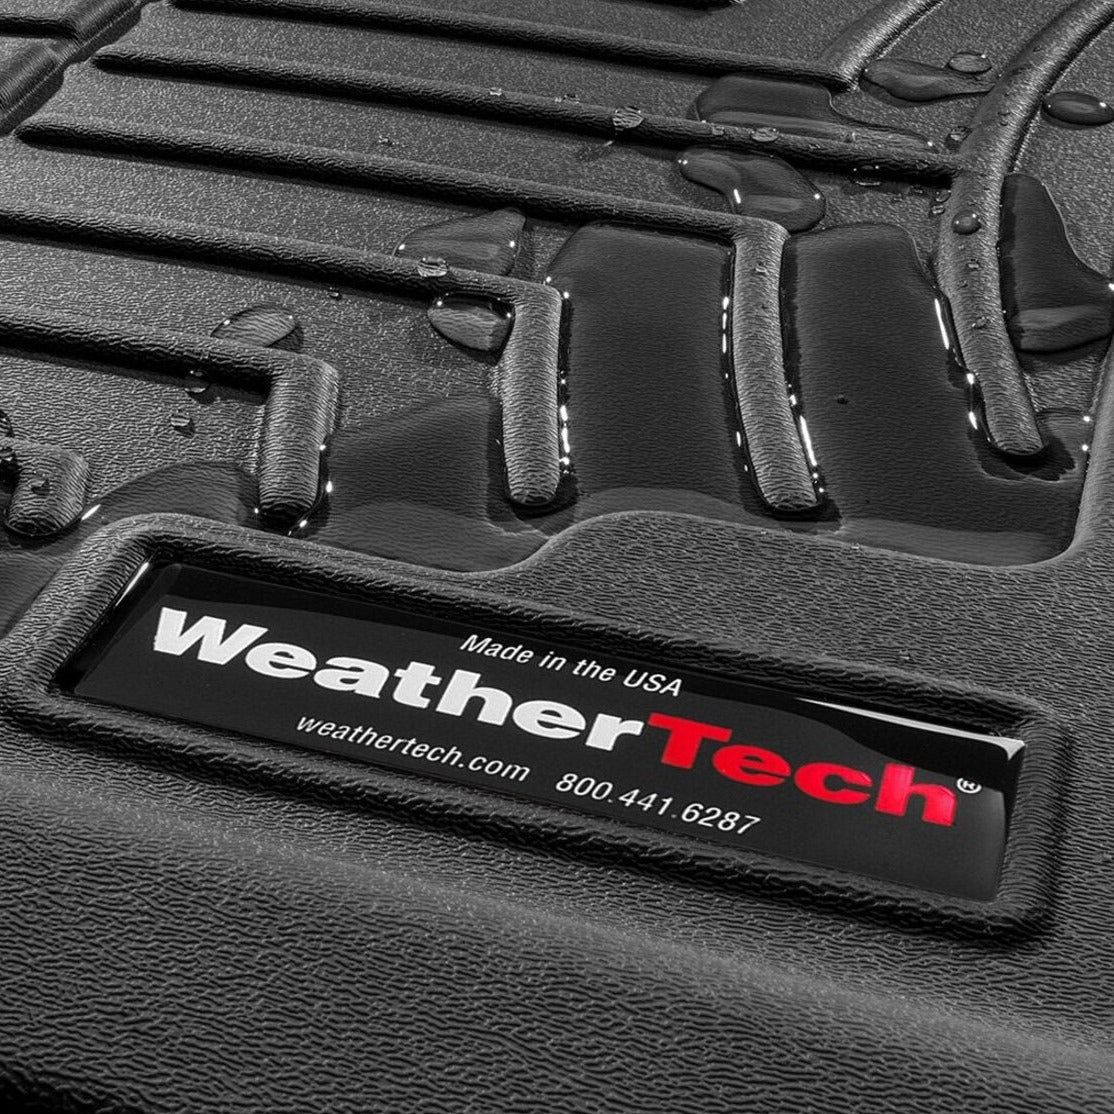 Custom-fit all-weather premium car mat by WeatherTech Switzlerand. Made to protect your car and its value.